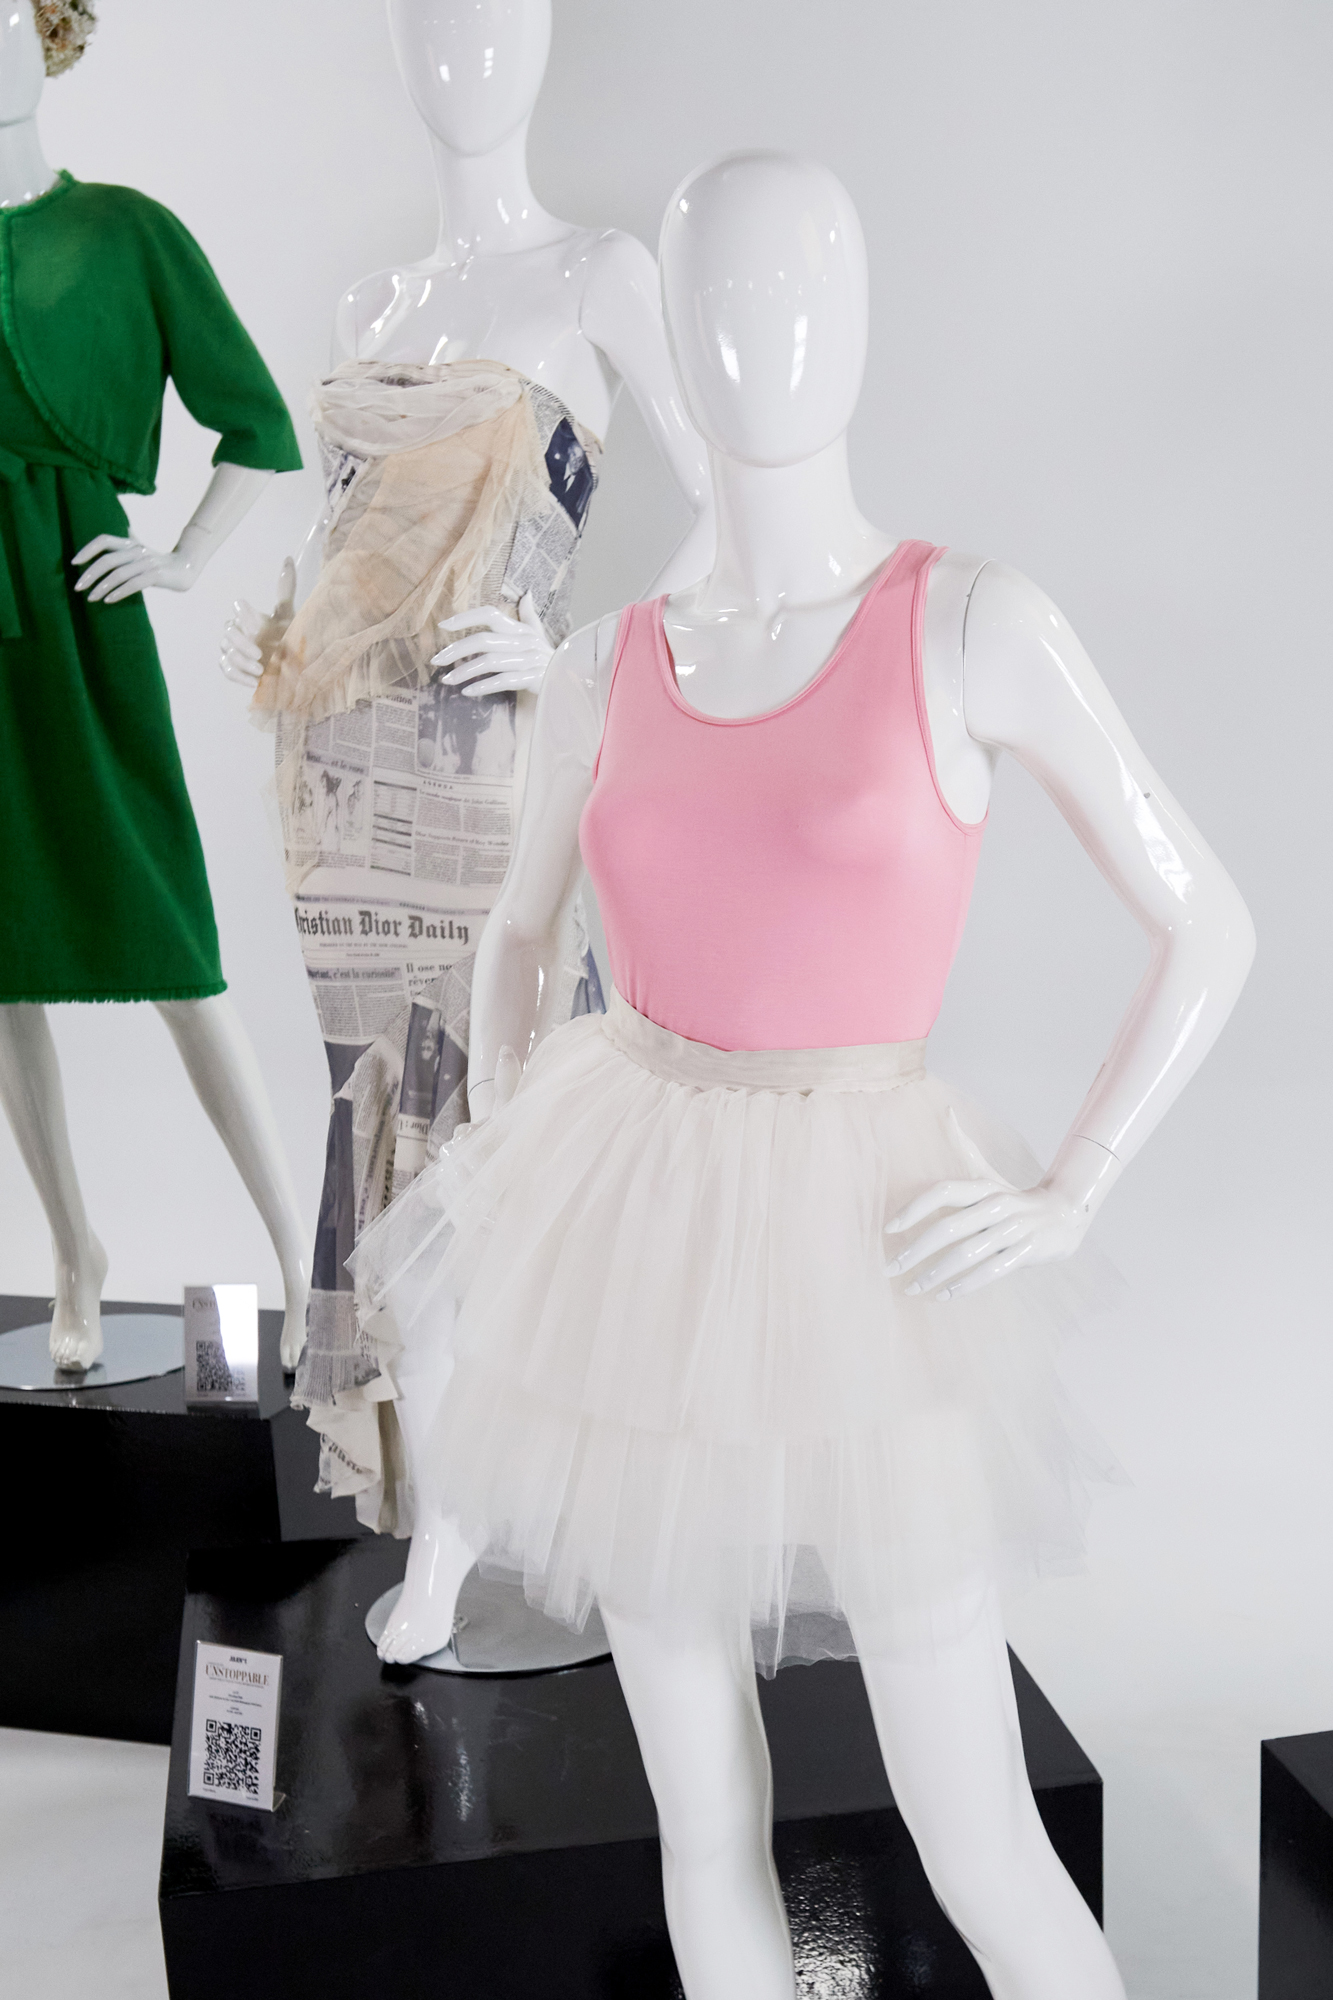 The Iconic Tutu Worn By Sarah Jessica Parker In Sex And The City Sells For Over 50000 